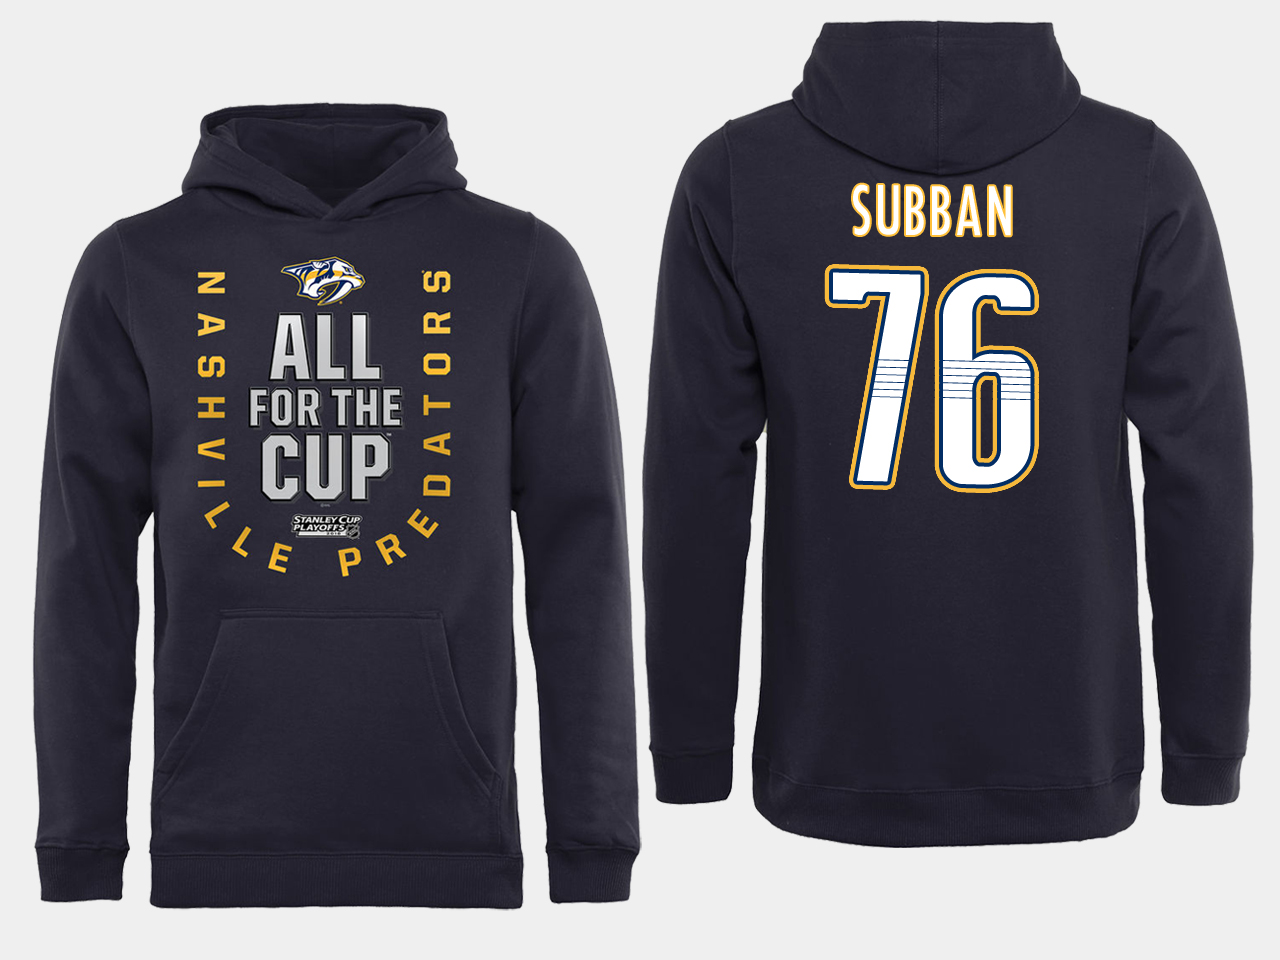 Men NHL Adidas Nashville Predators #76 Subban black ALL for the Cup hoodie->customized nhl jersey->Custom Jersey